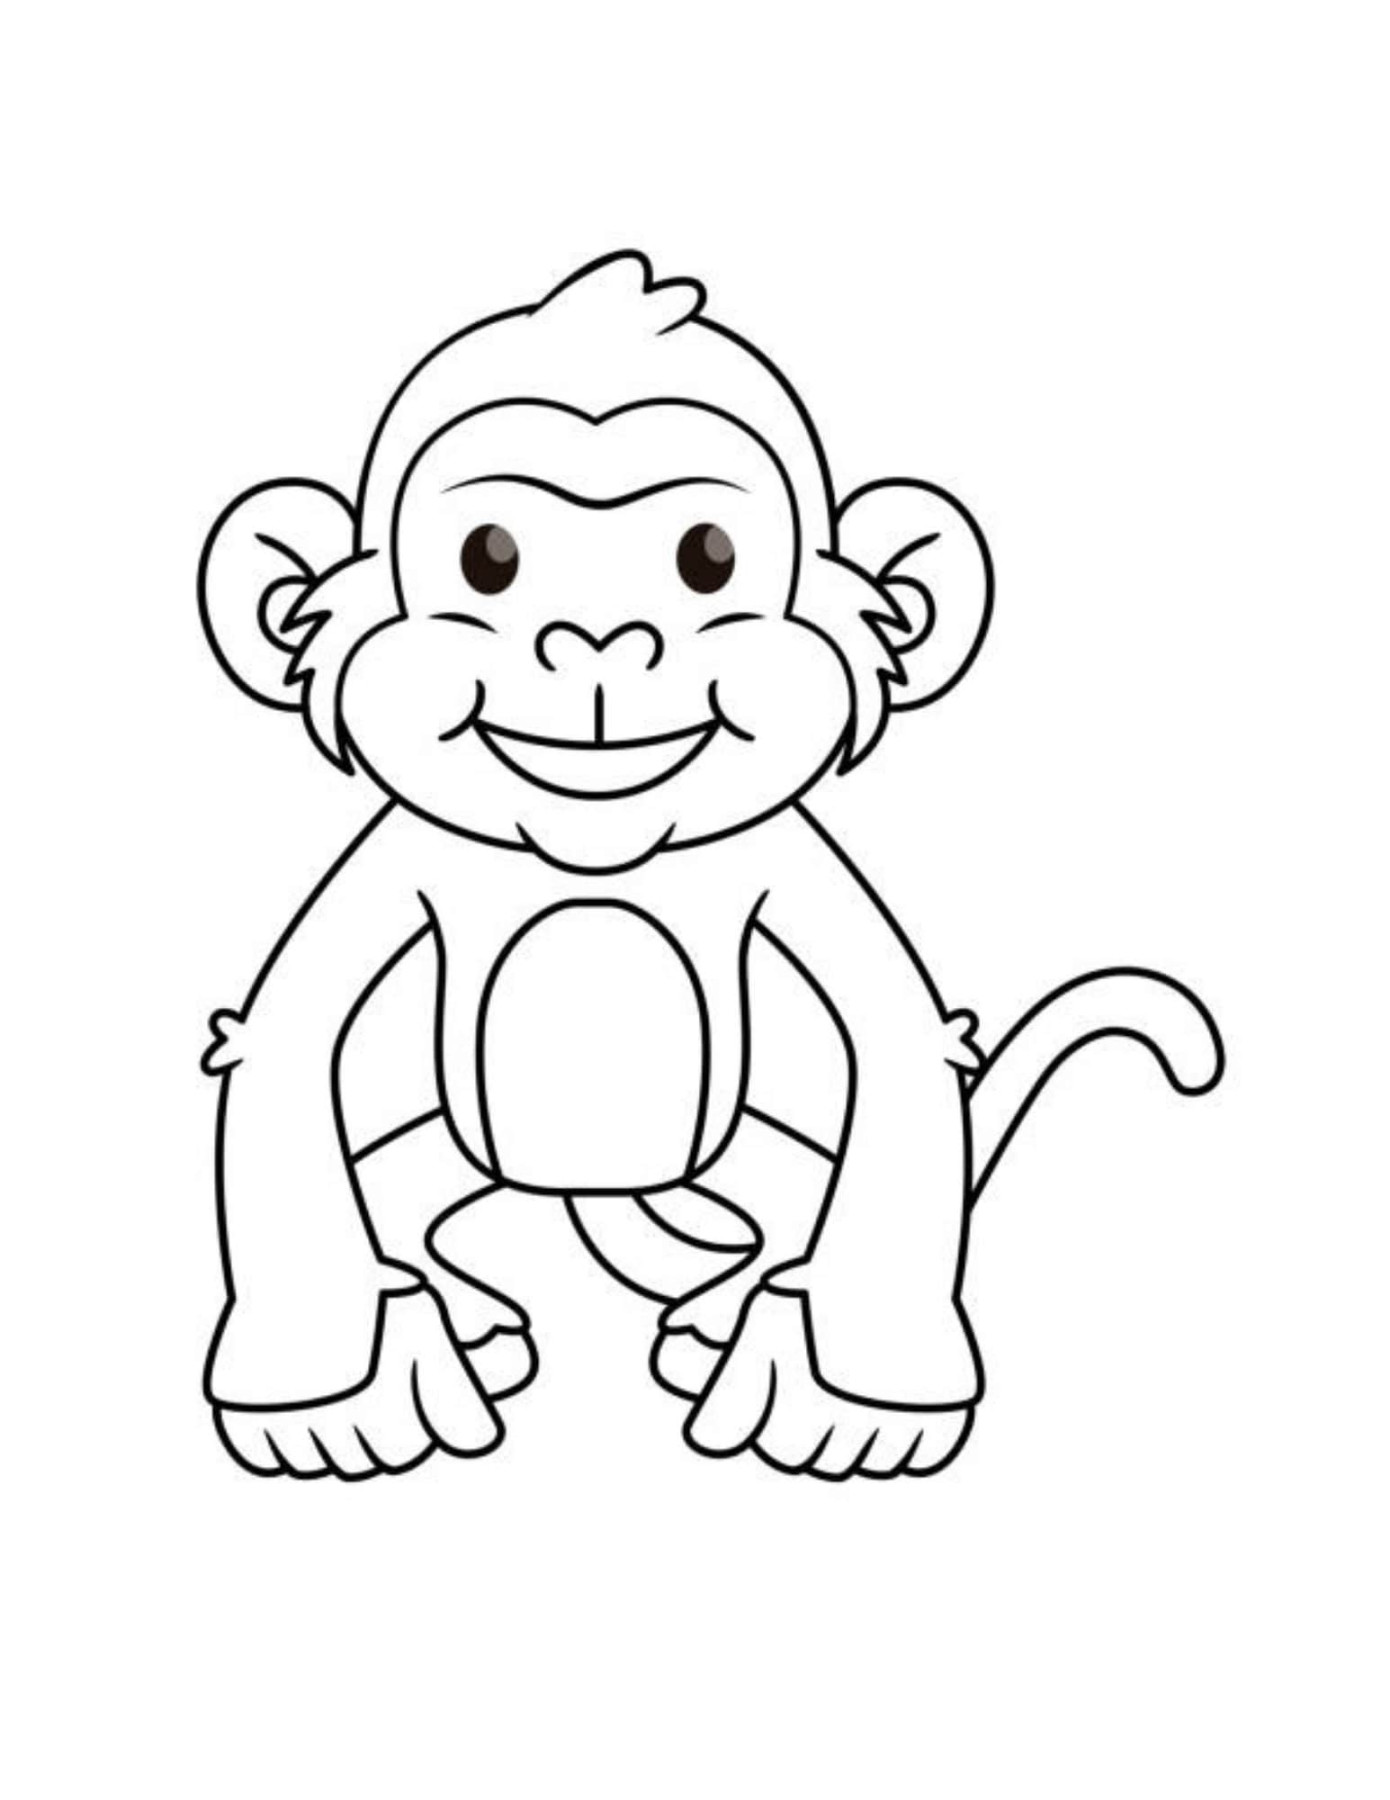 Animal Coloring Pages  Printable Animal Coloring Pages - Etsy